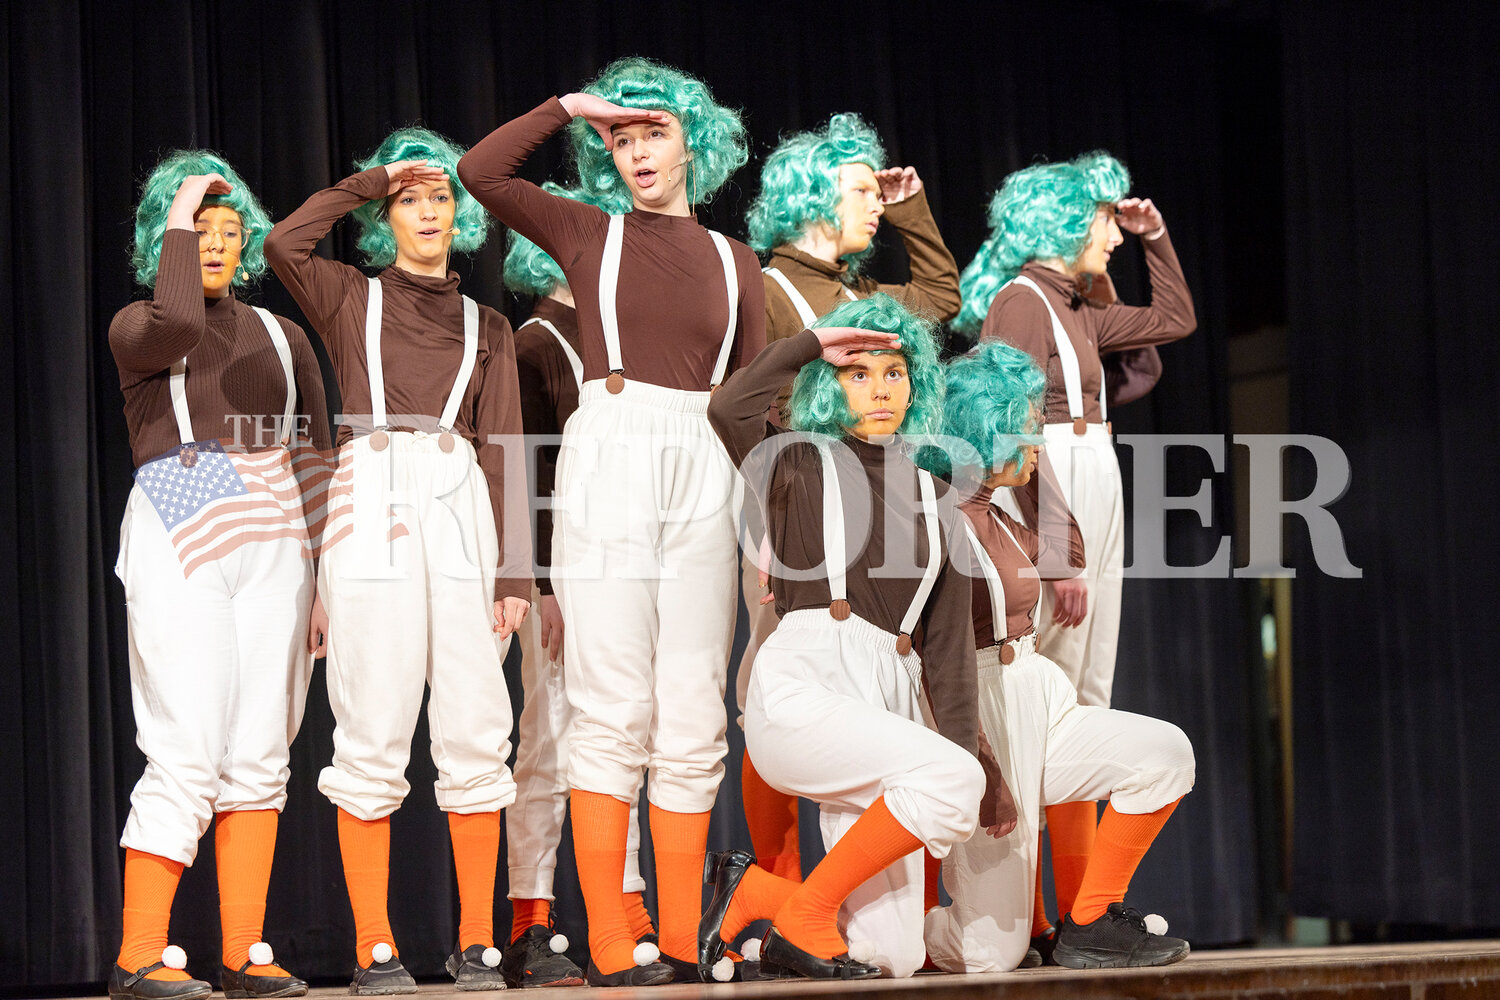 The Oompa-Looompas perform during Willy Wonka Saturday, March 23.